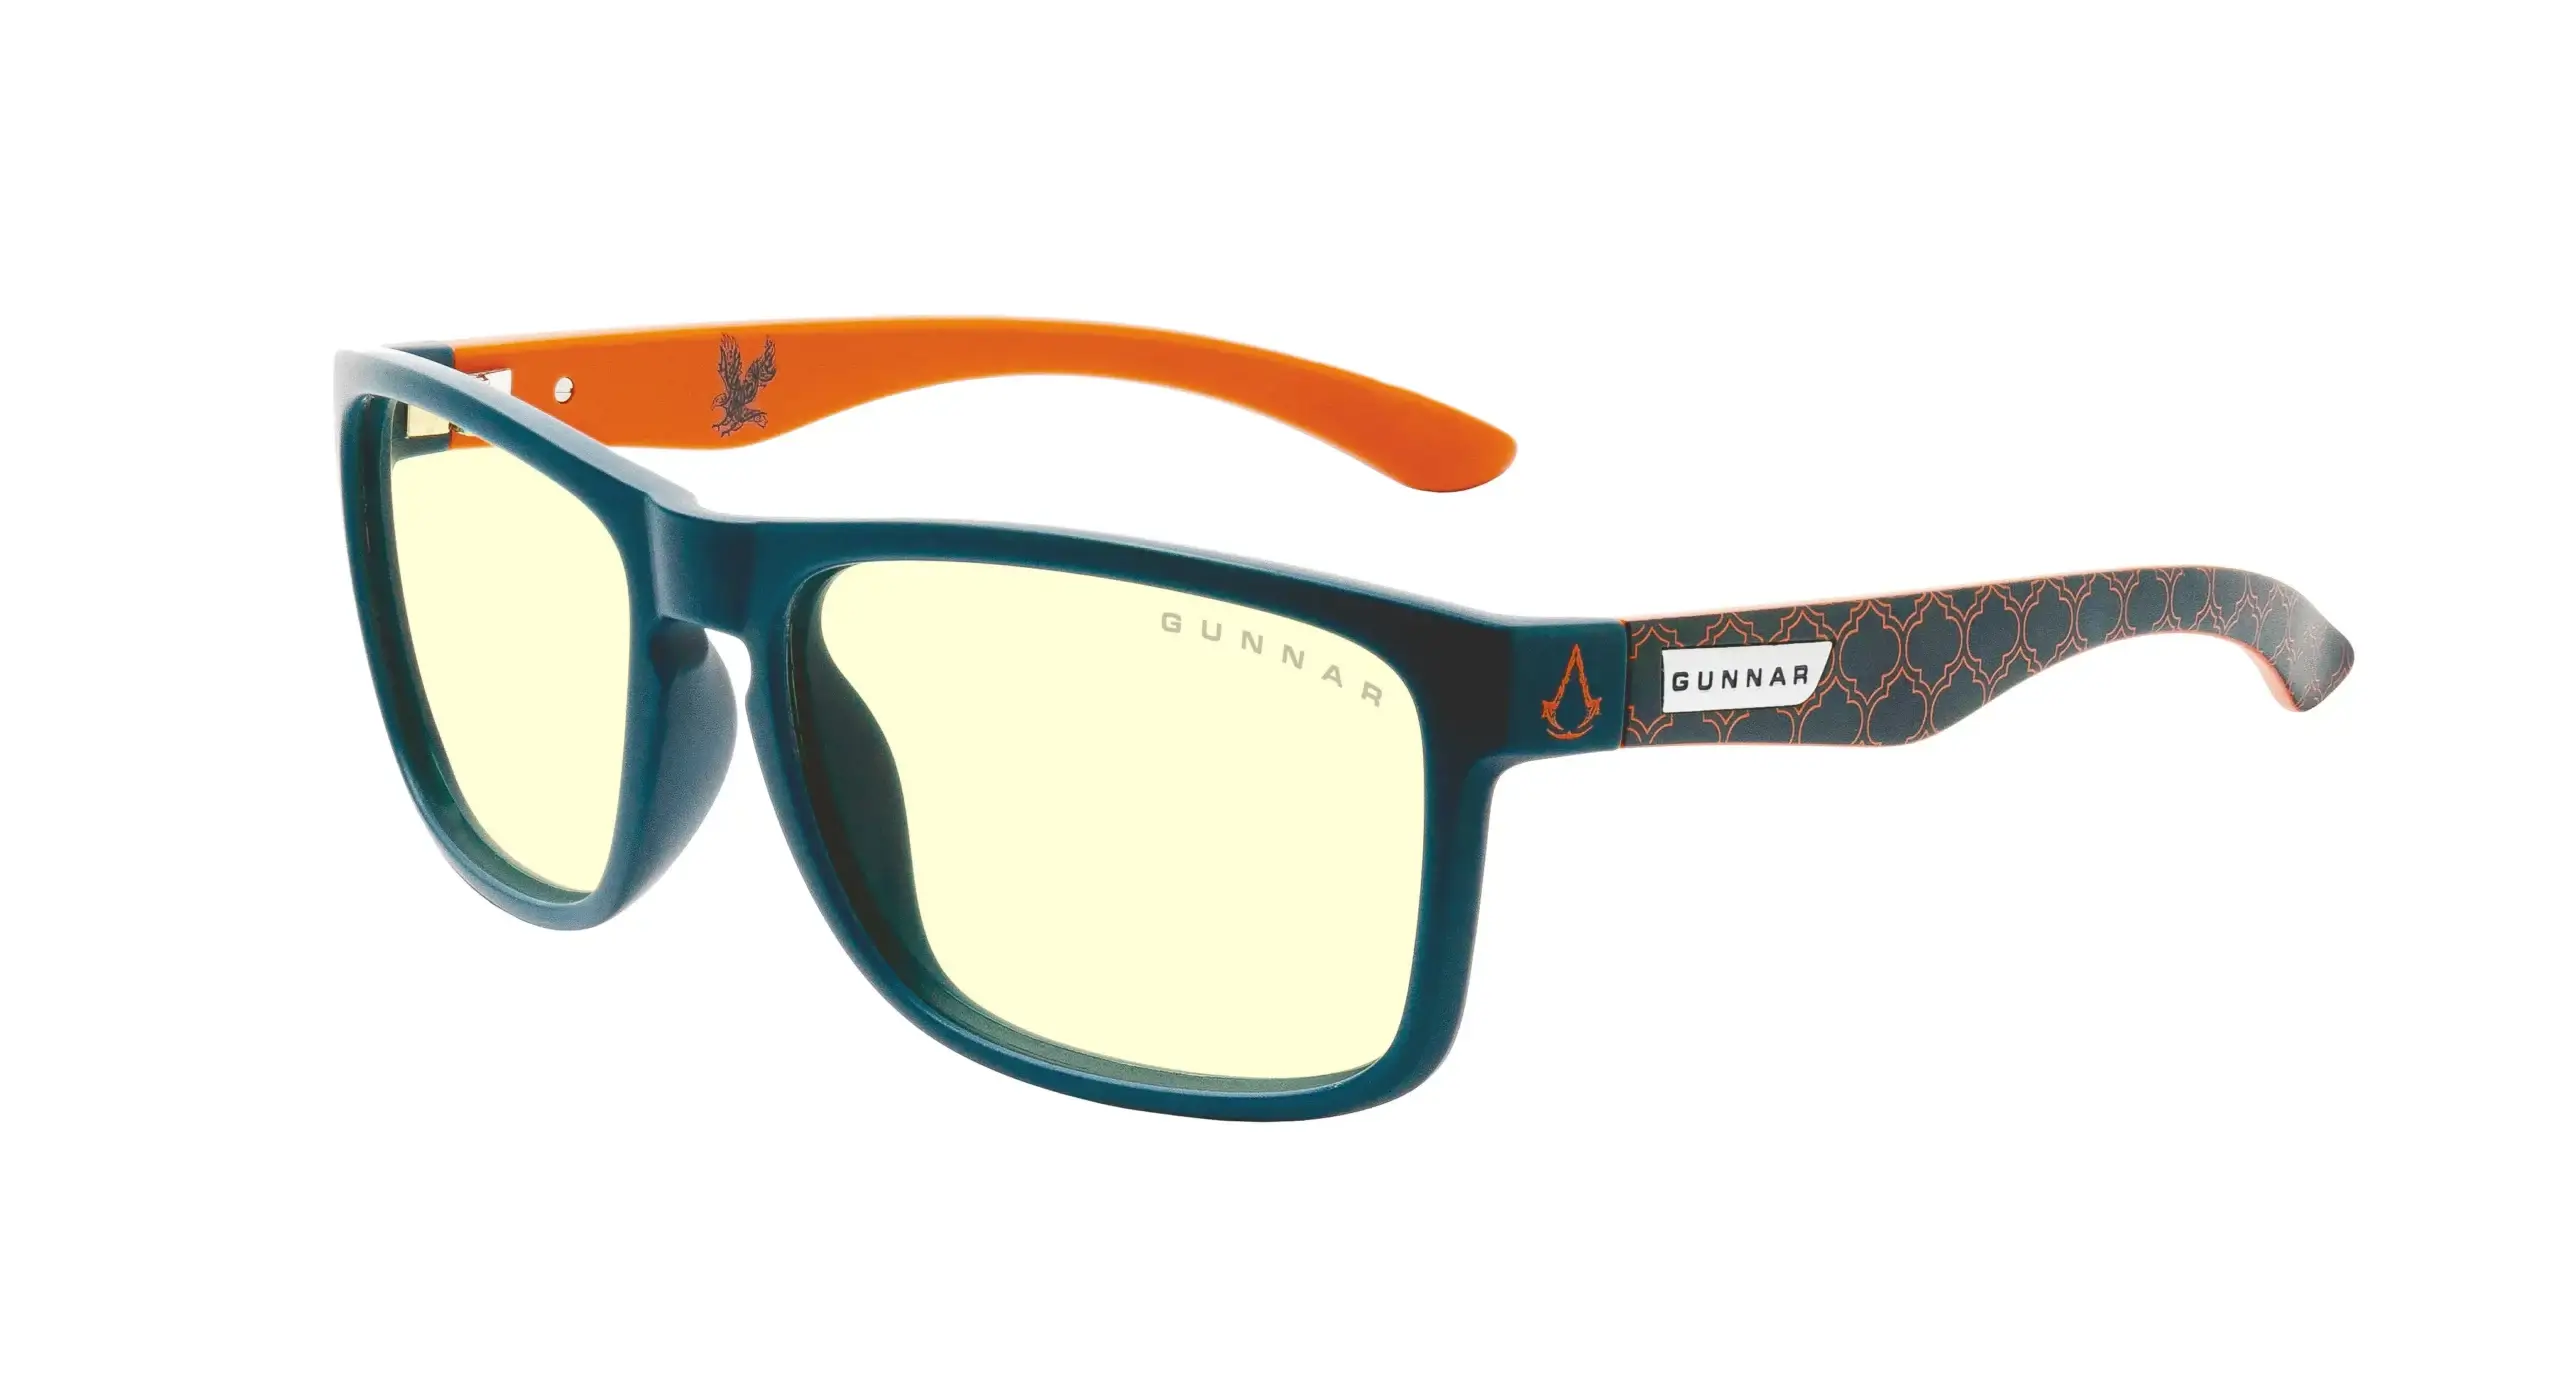 A close up photo showing the Intercept Assassin's Creed Mirage glasses. The semi-rimless amber colored glasses have the Assassin's Creed logo etched on the sides of the frame arms.